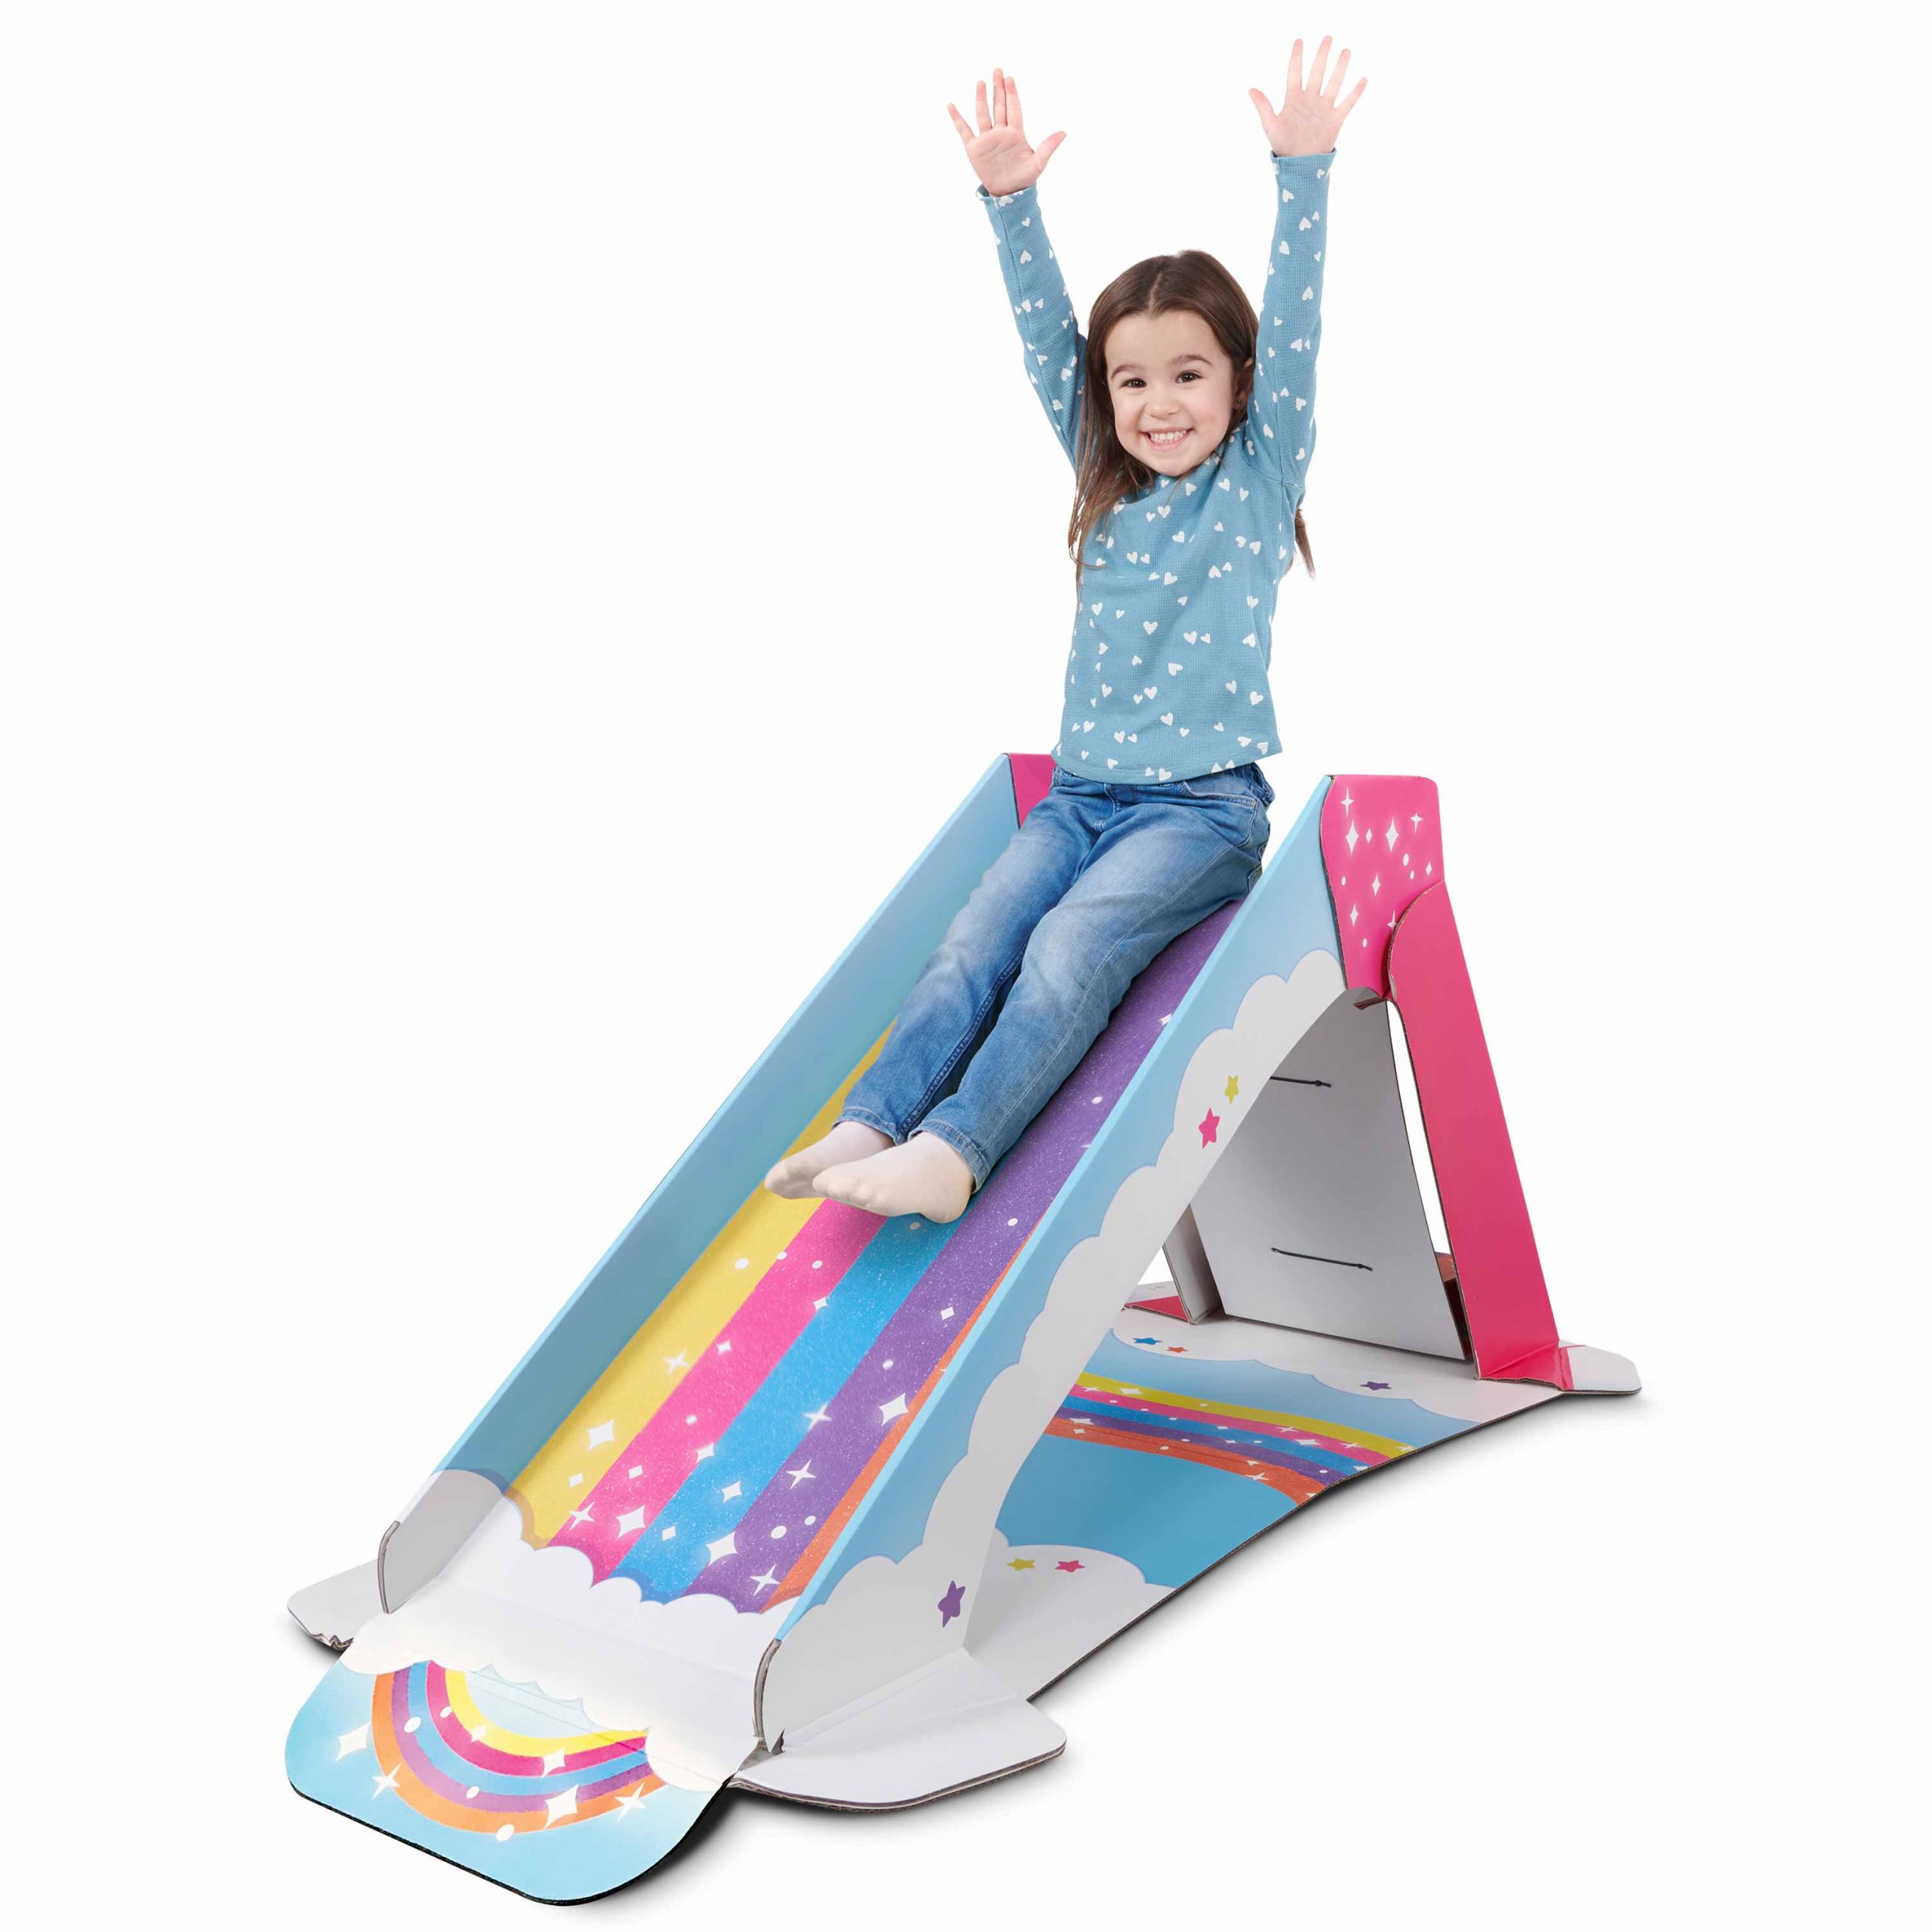 Gifts for Kids-Toddlers-Pop 2 Play Slide - SavvyMom